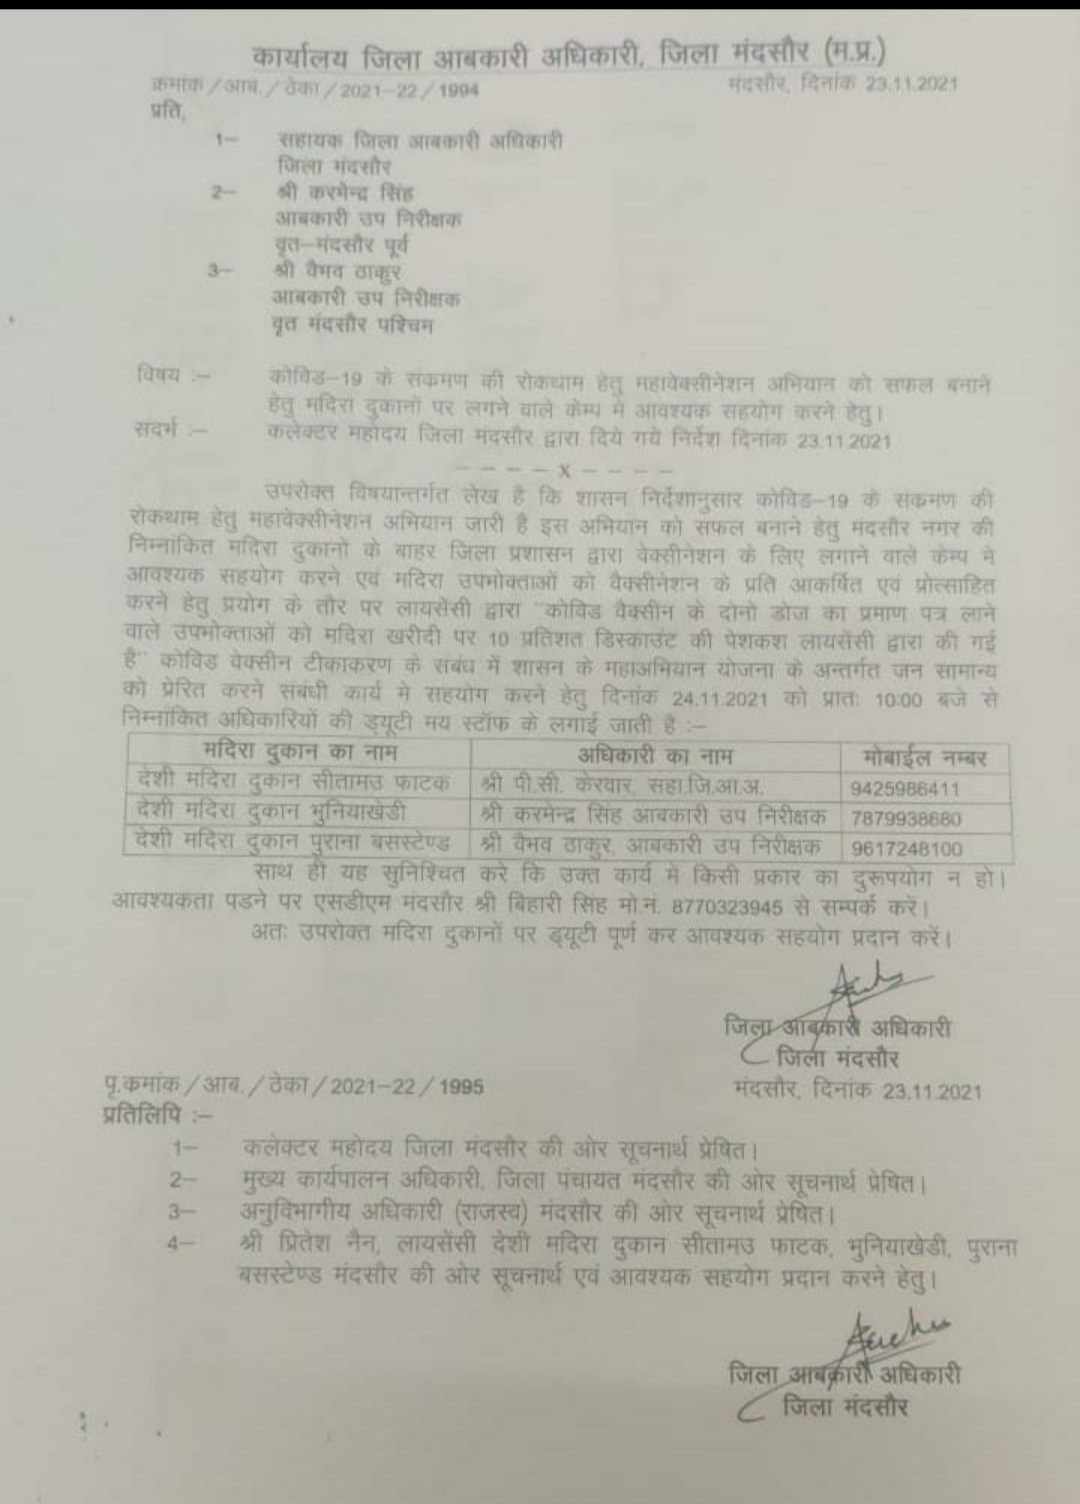 Mandsaur District Excise Officer Anil Sachan issued an order for exemption on purchase of liquor